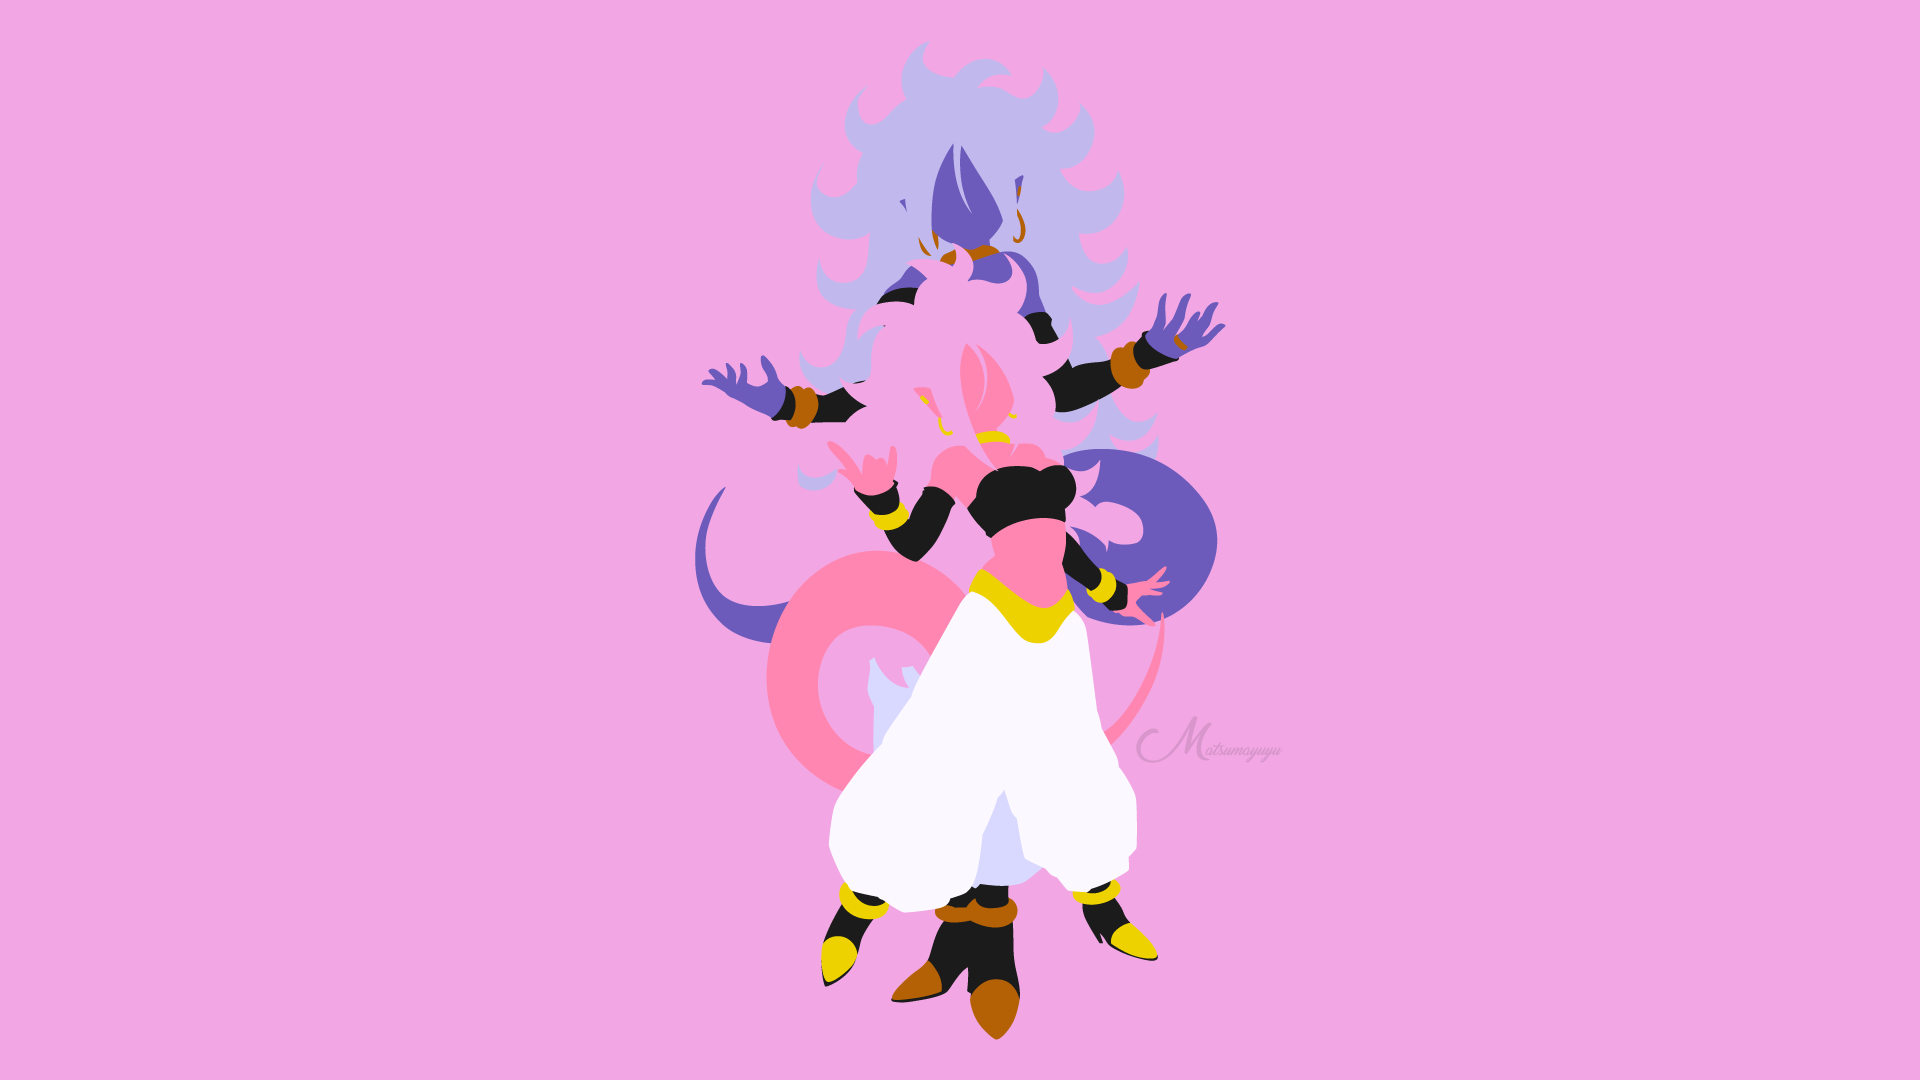 Android 21 Wallpaper